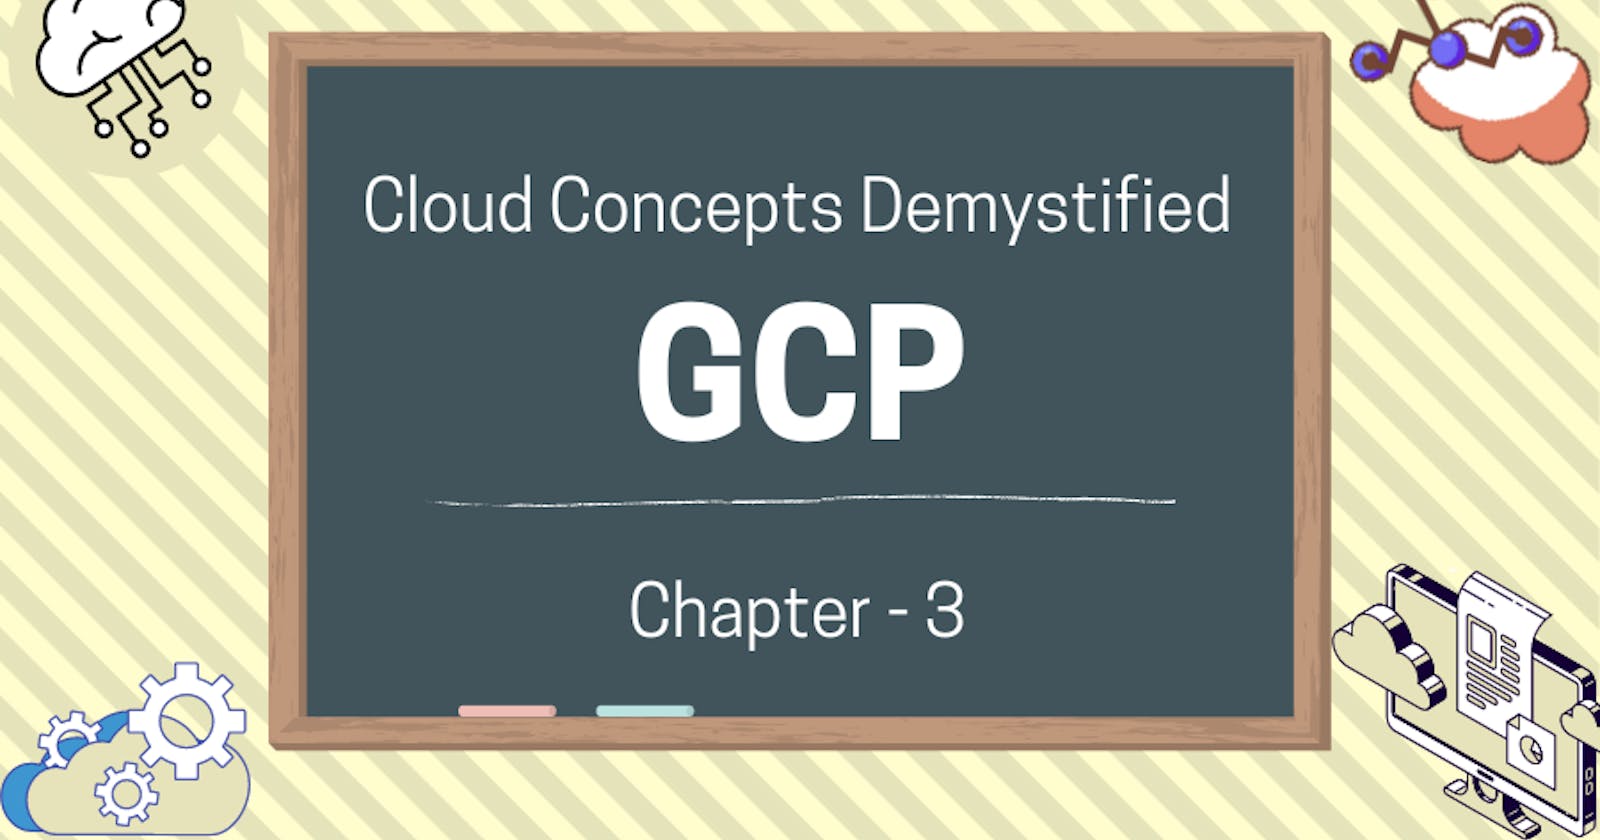 Cloud Concepts Demystified With GCP: A Comprehensive Guide to Setting up and Managing Your Google Cloud Platform (GCP) Account with a Dash of Laughter